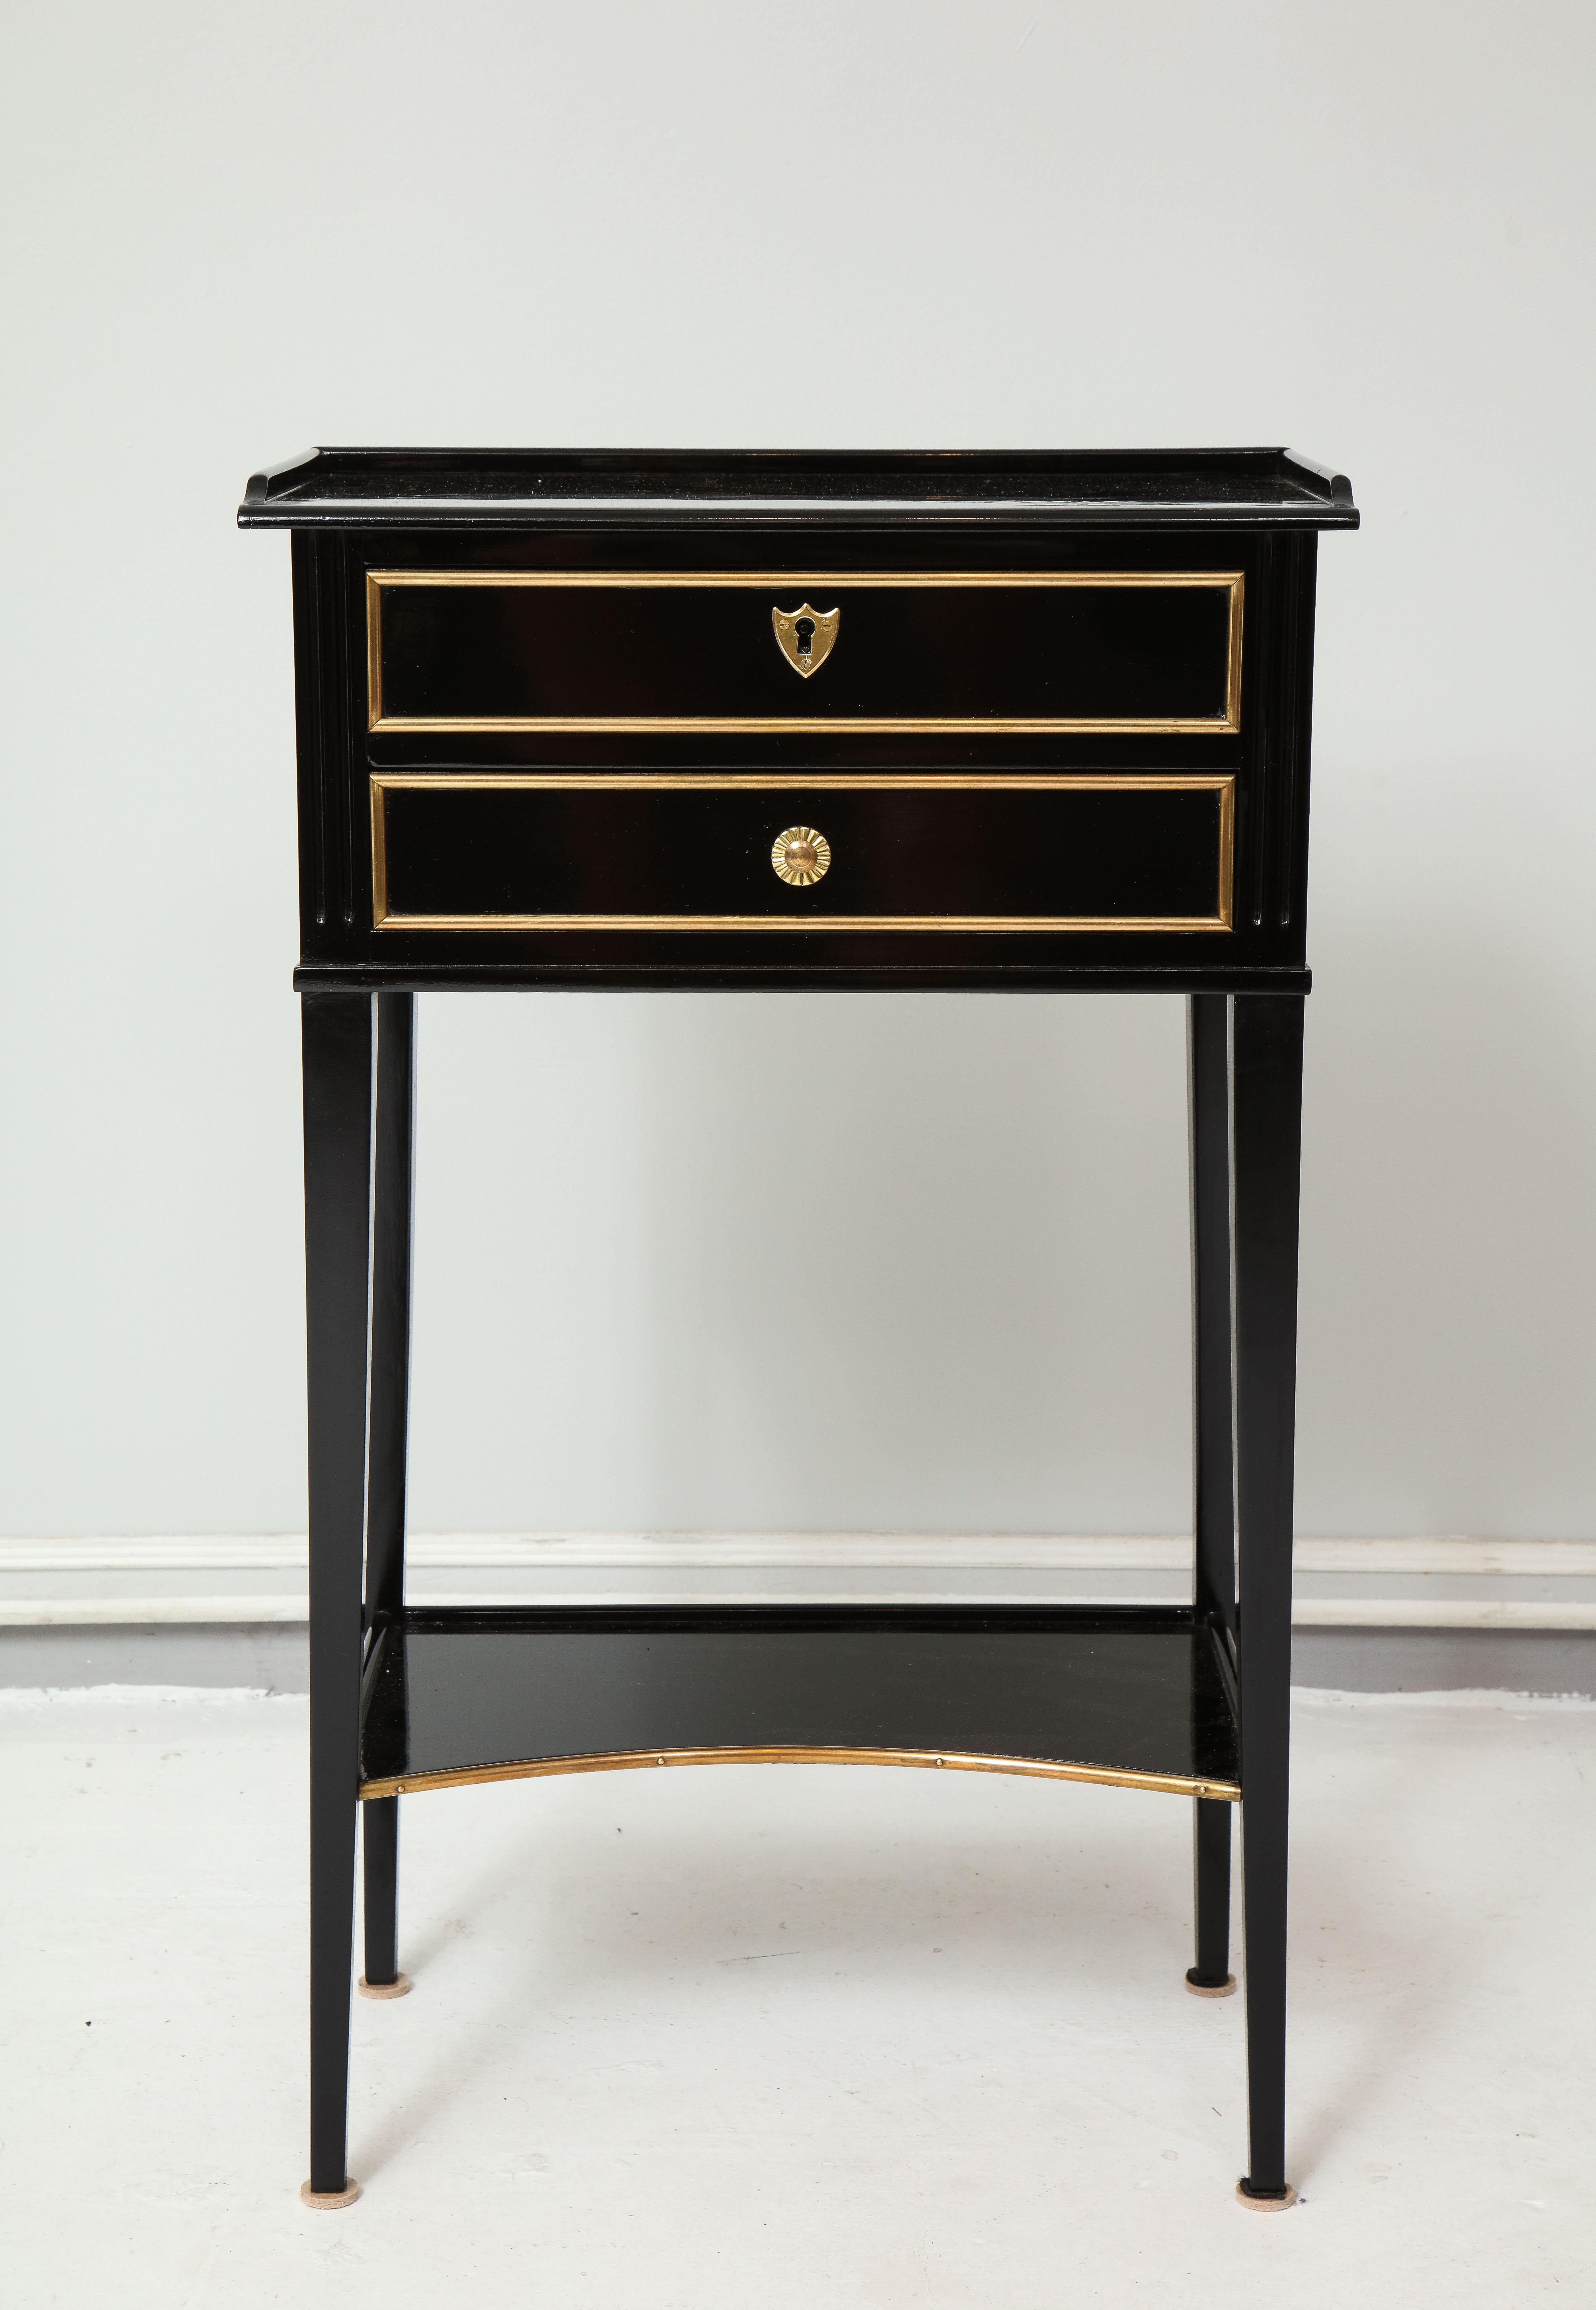 Pair of ebonized Directoire style end tables/ nightstands with bronze trimming and two drawers.